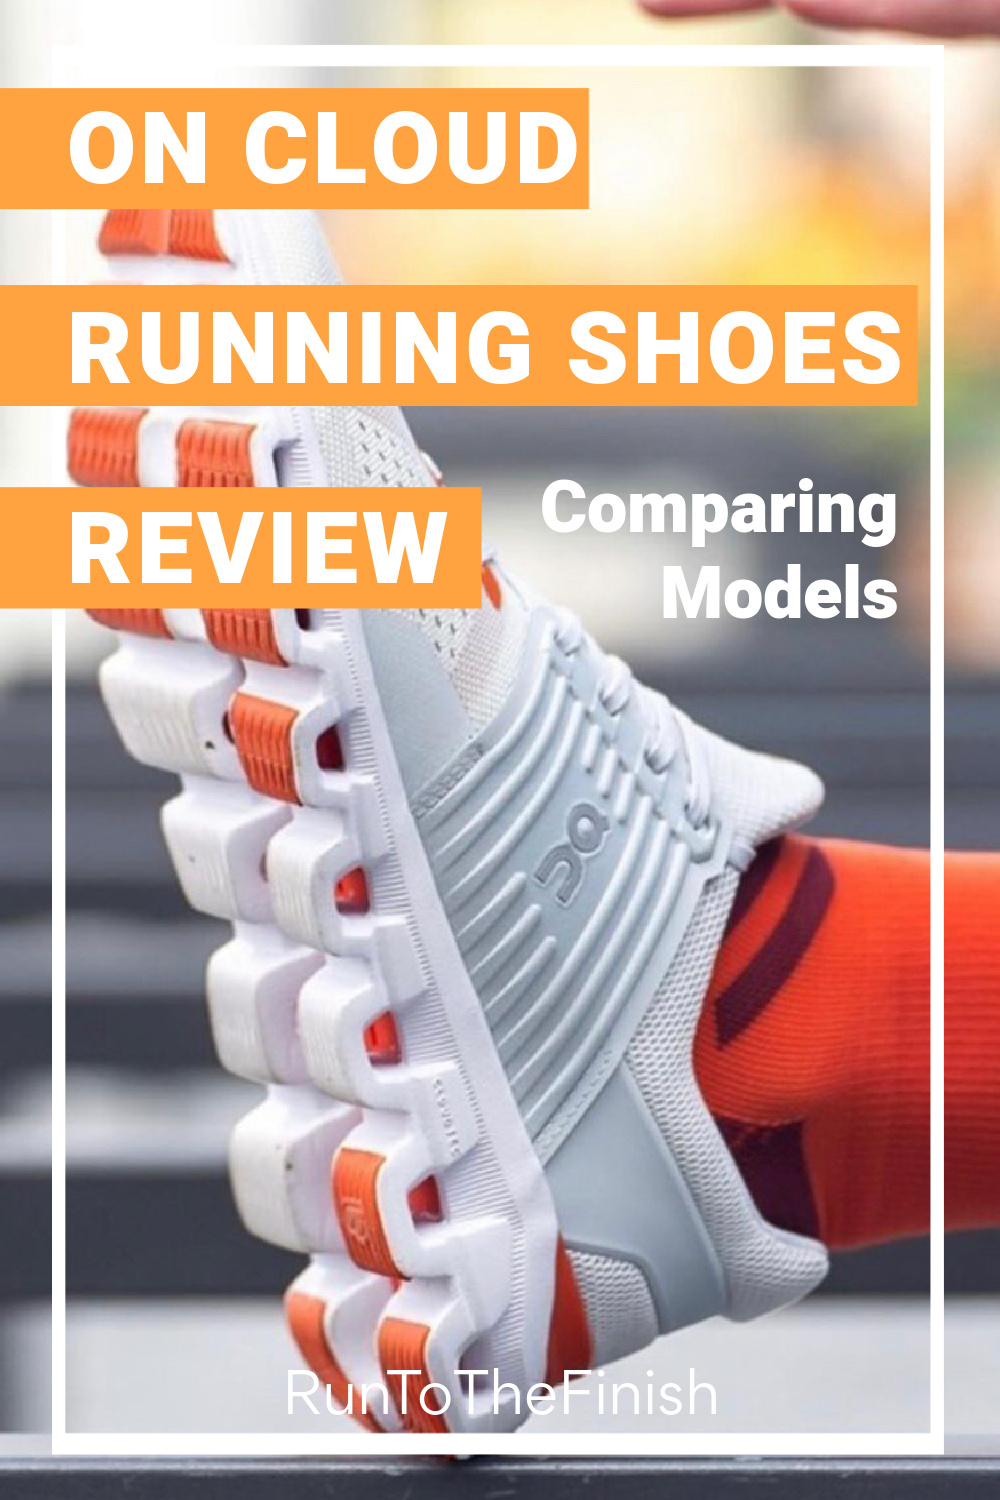 On Cloud Shoes Review